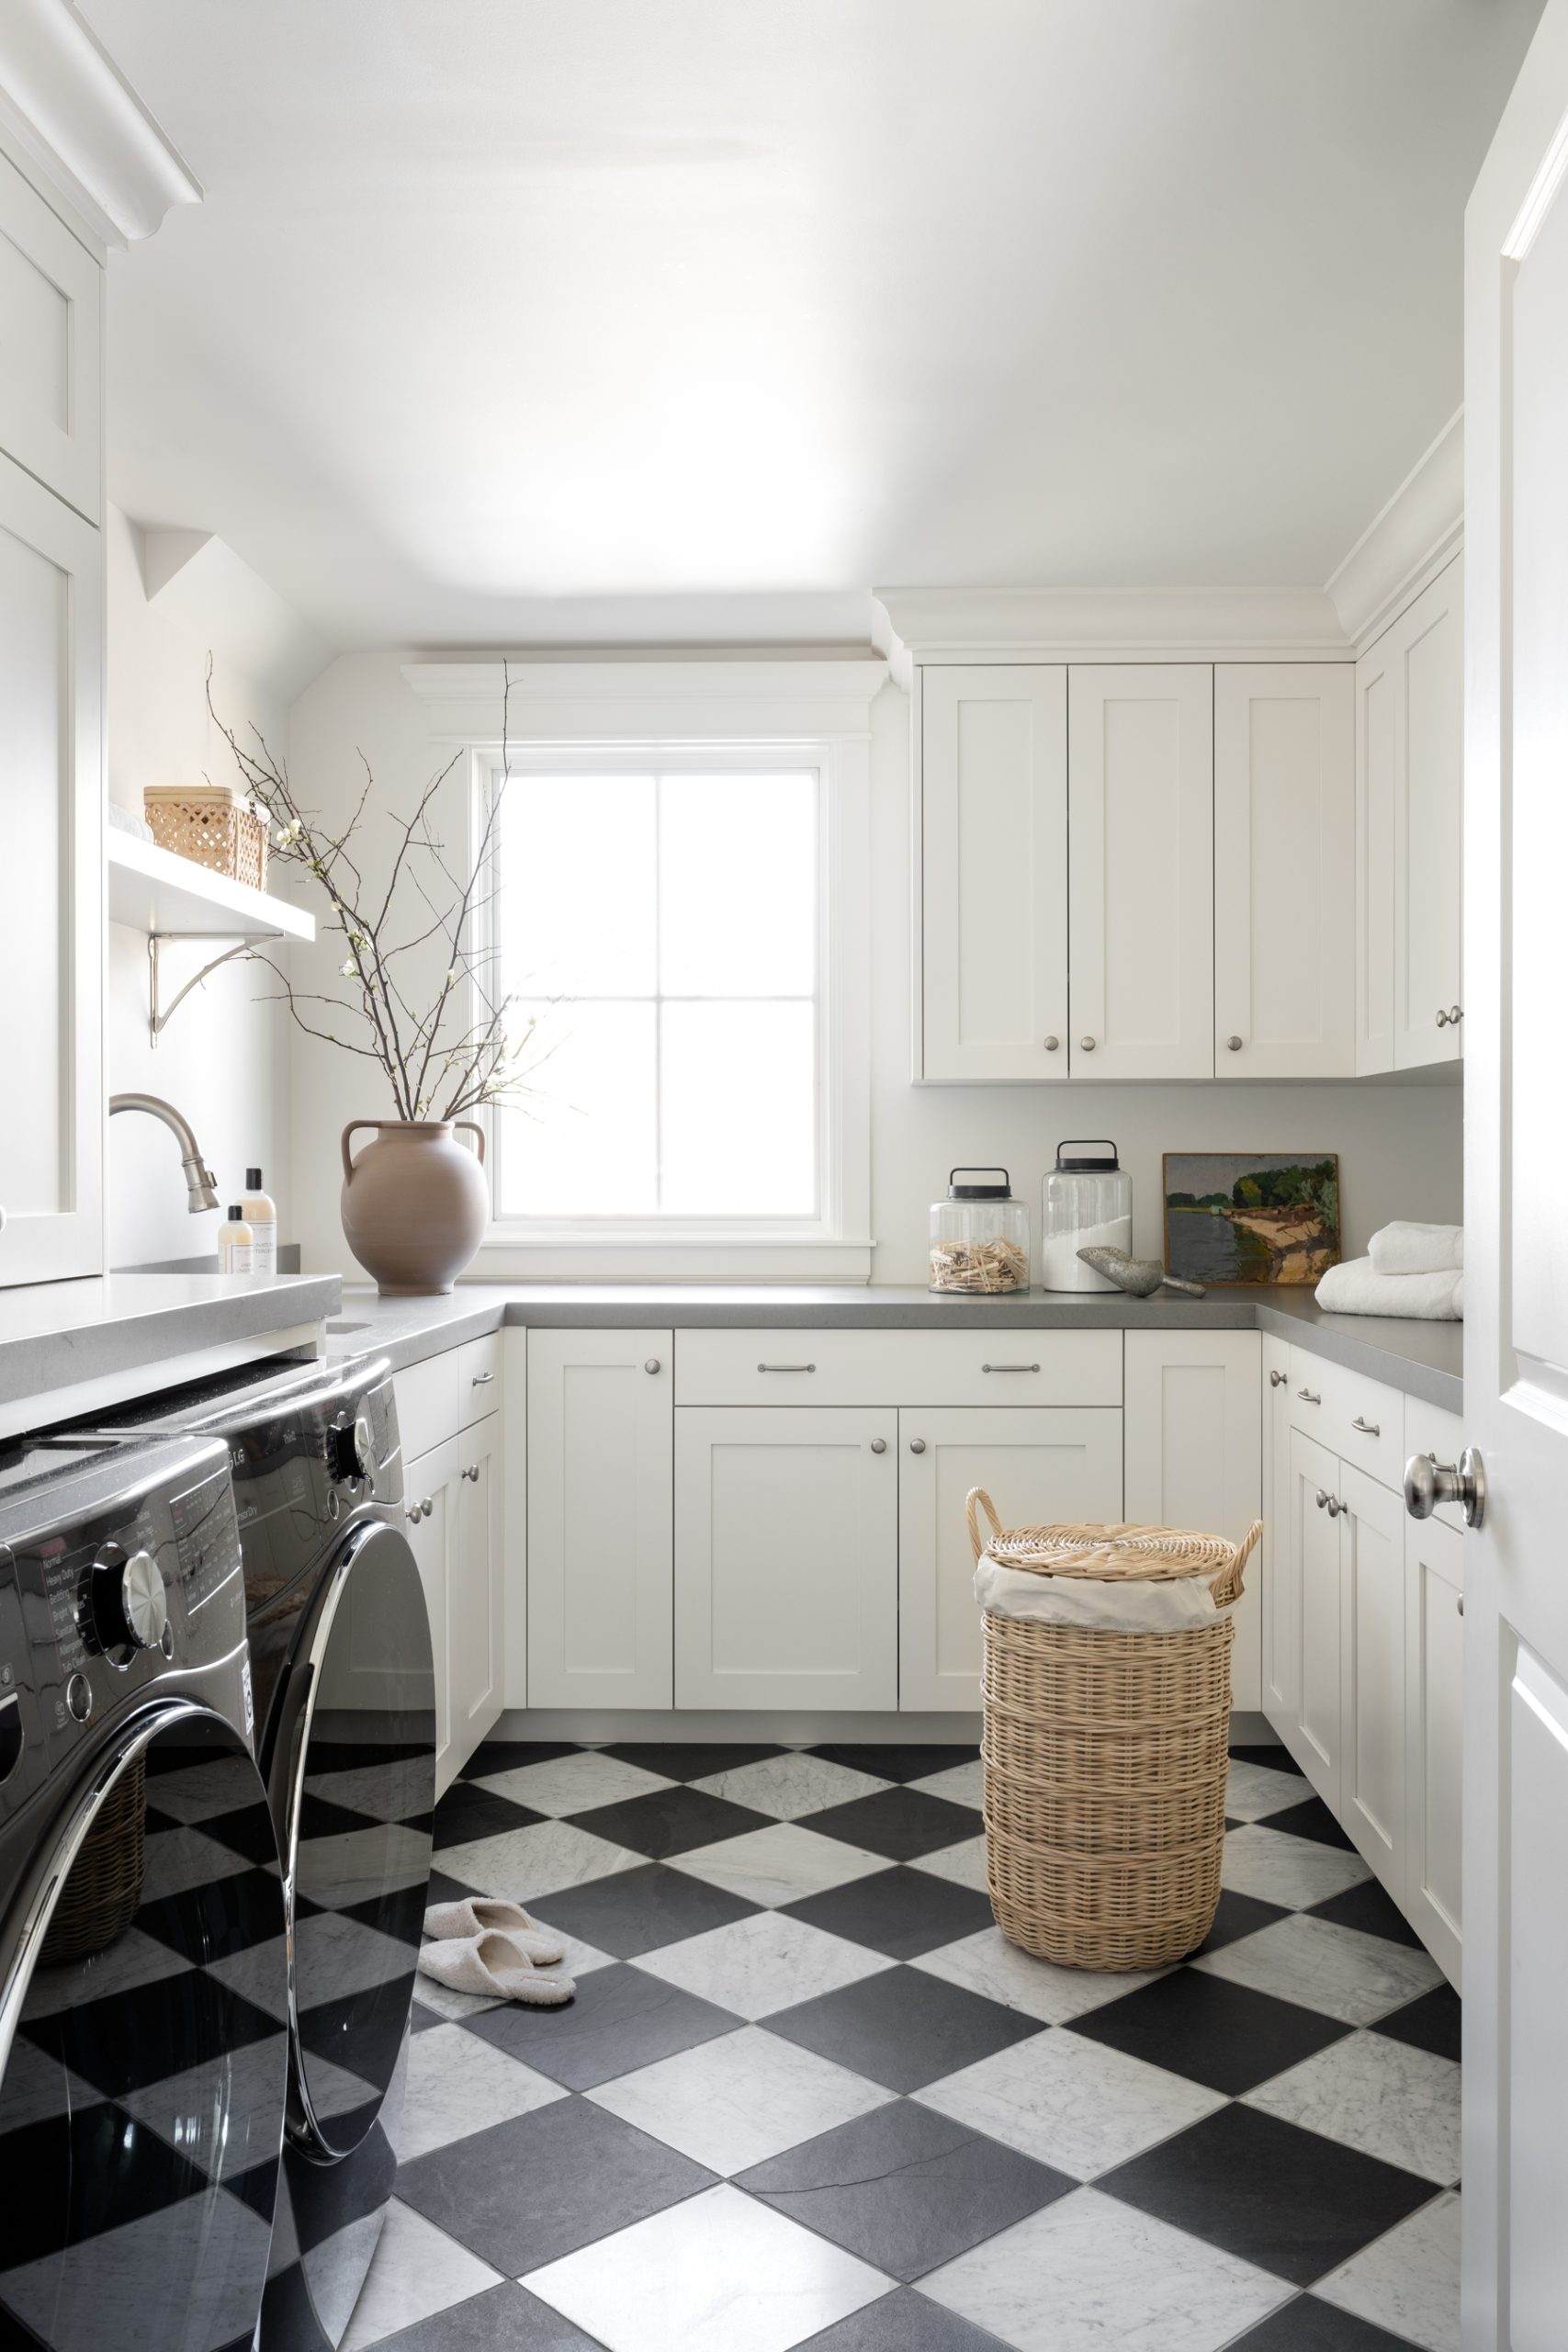 laundry room with black and white checkered floor and white cabinetry